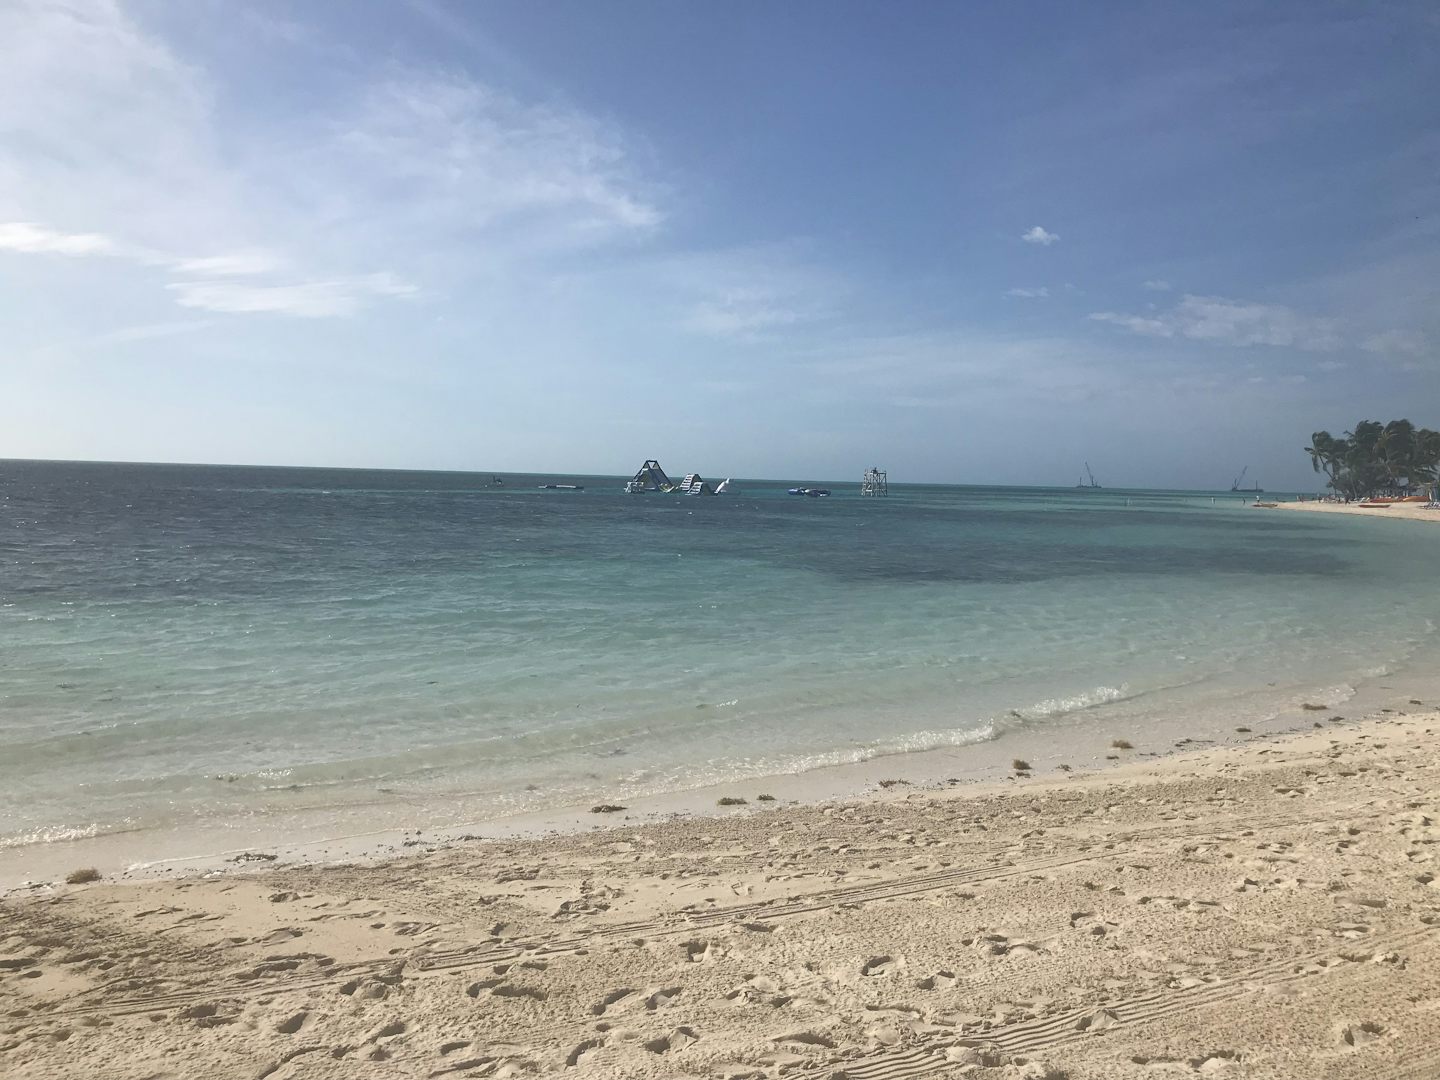 Cococay is beautiful!